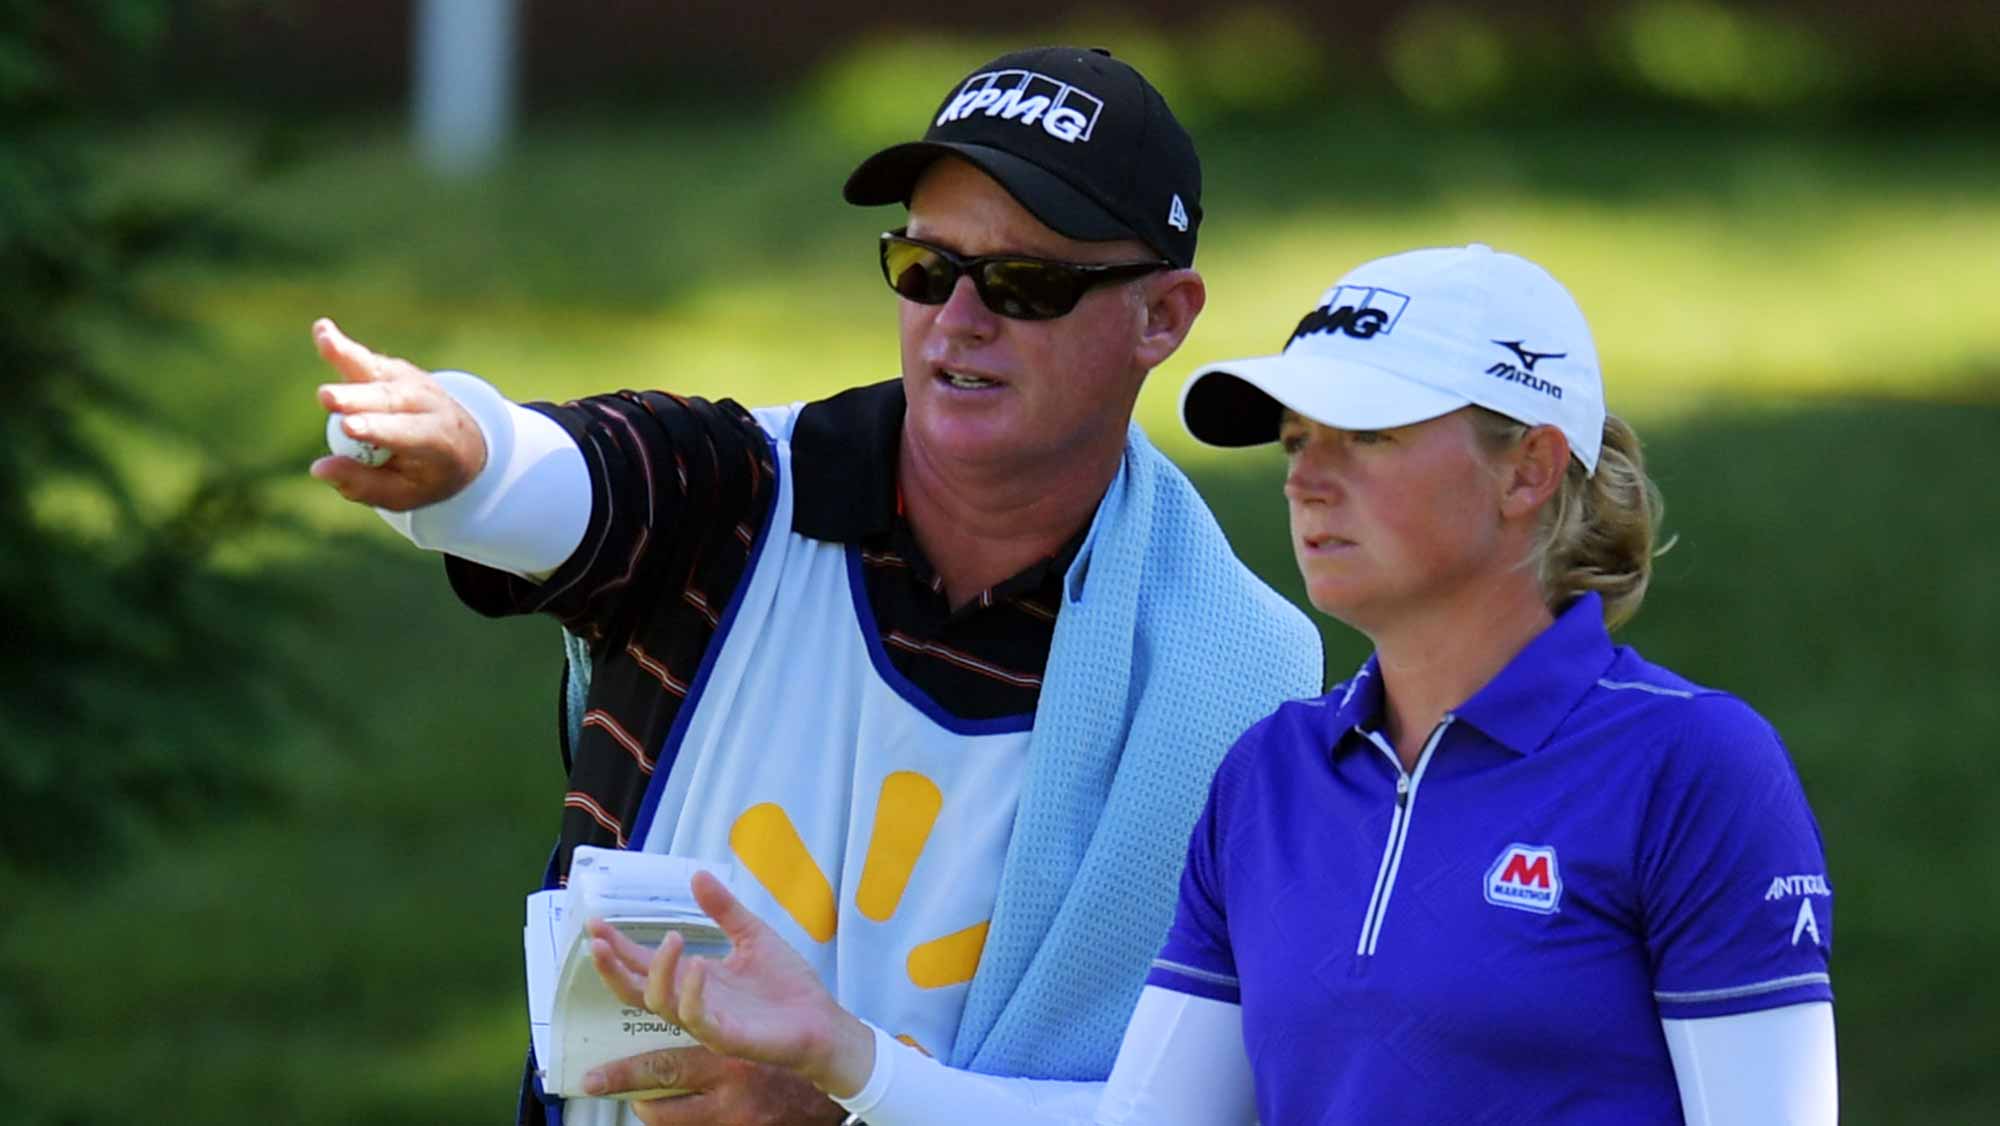 Stacy Lewis consults with her caddie on the 14th hole during the second round of the Walmart NW Arkansas Championship Presented by P&G 